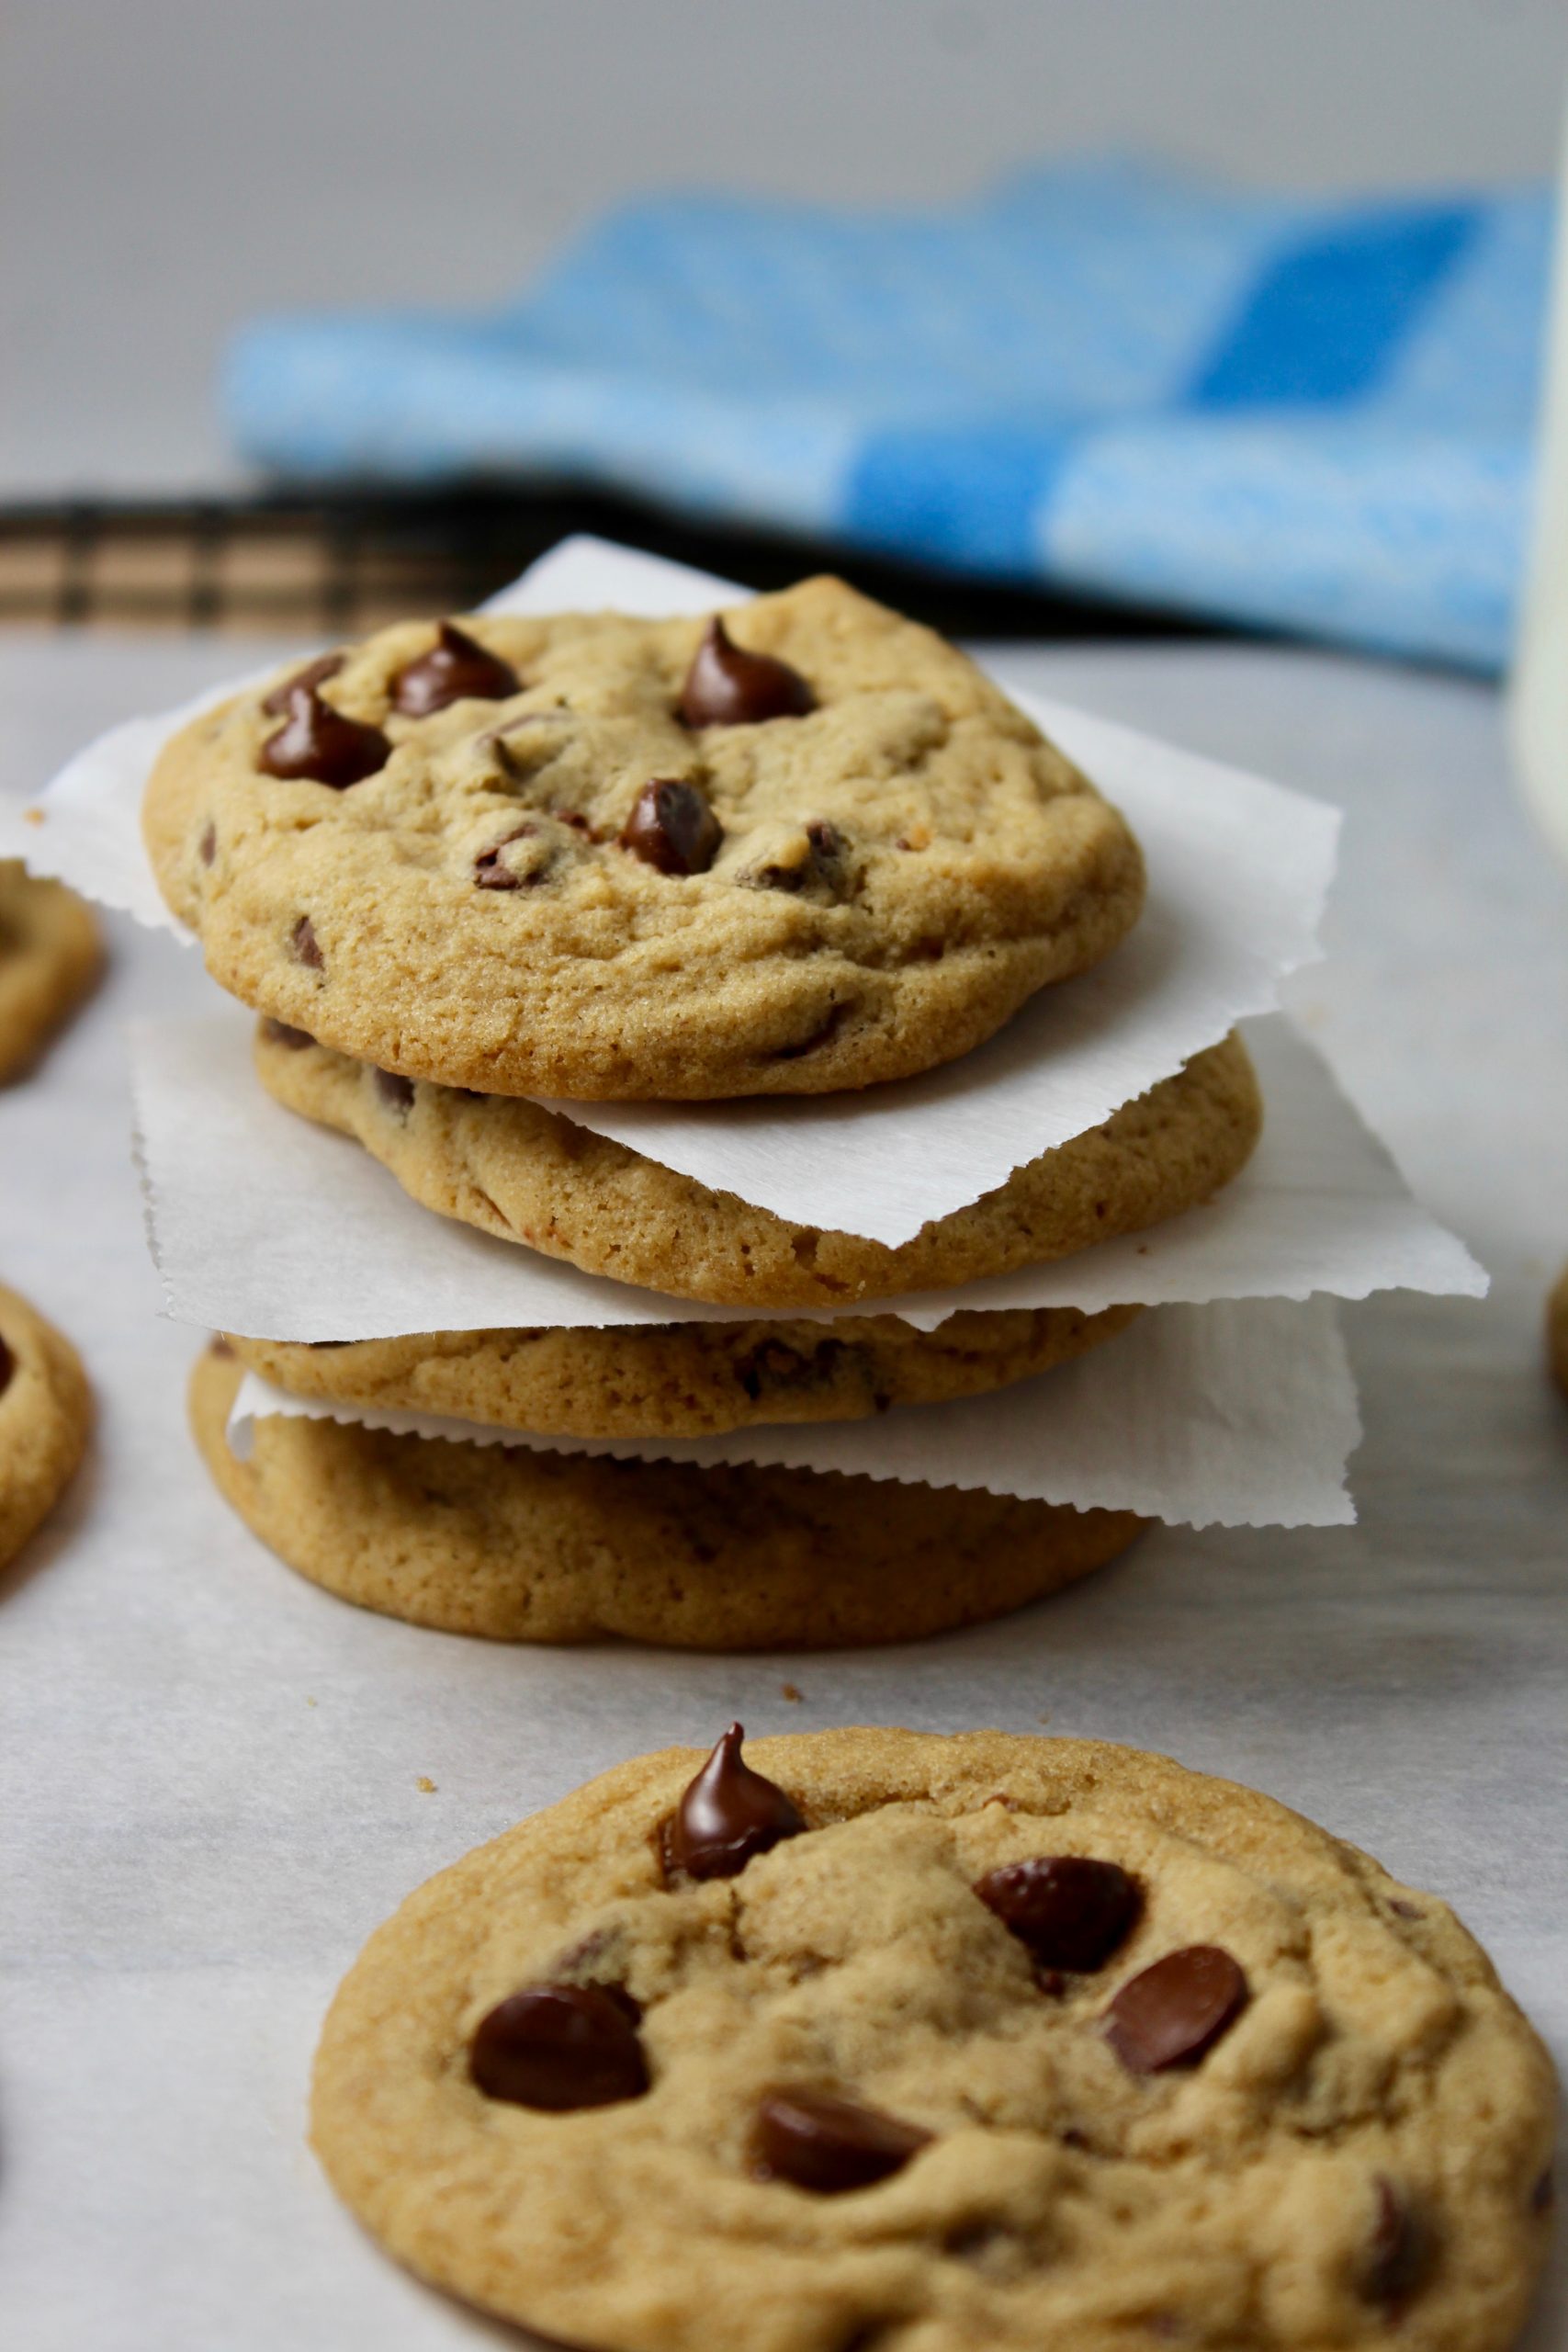 https://www.epicuricloud.com/wp-content/uploads/2020/05/Soft-Chewy-Chocolate-Chip-Cookies-portrait-stack-scaled.jpg